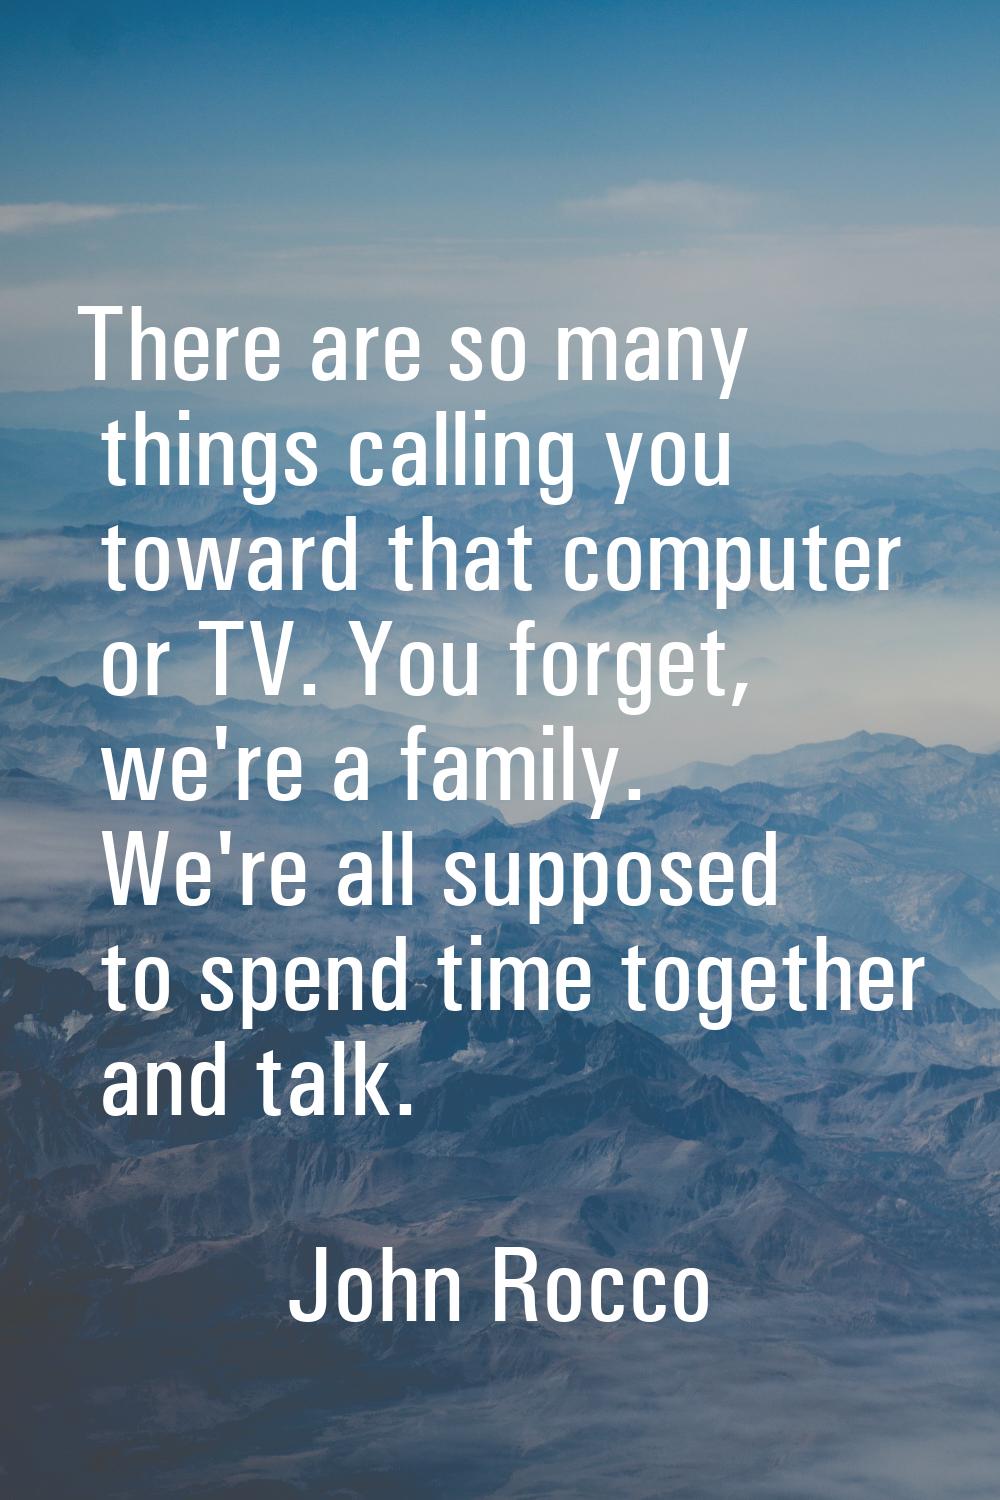 There are so many things calling you toward that computer or TV. You forget, we're a family. We're 